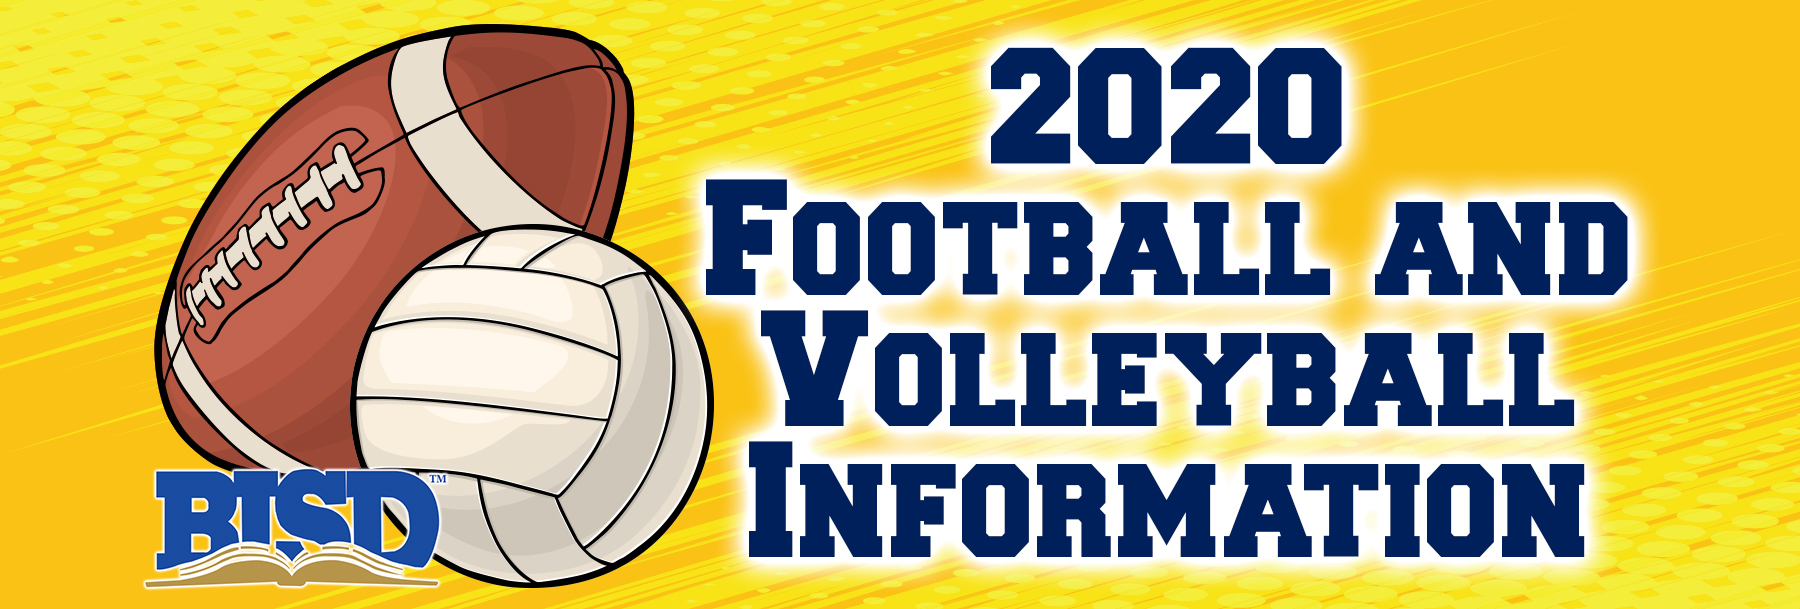 2020 Football and Volleyball Information